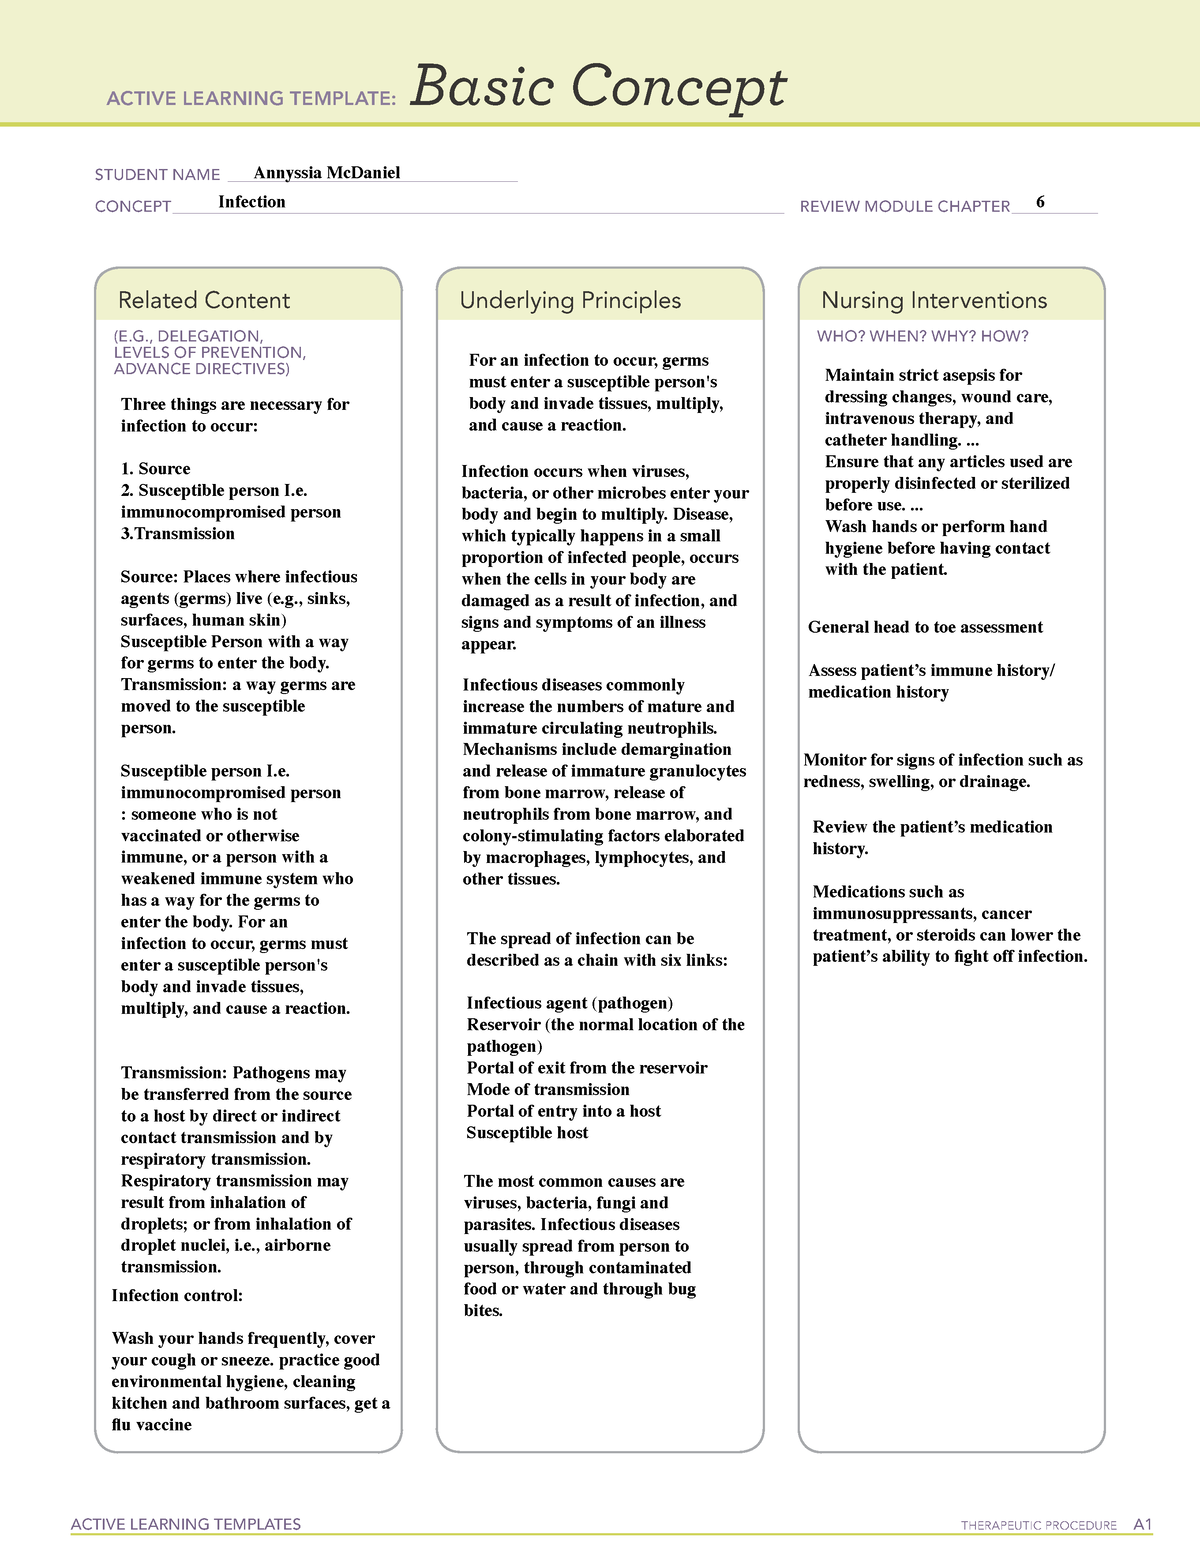 Active Learning Template Basic Concept NR283 ACTIVE LEARNING